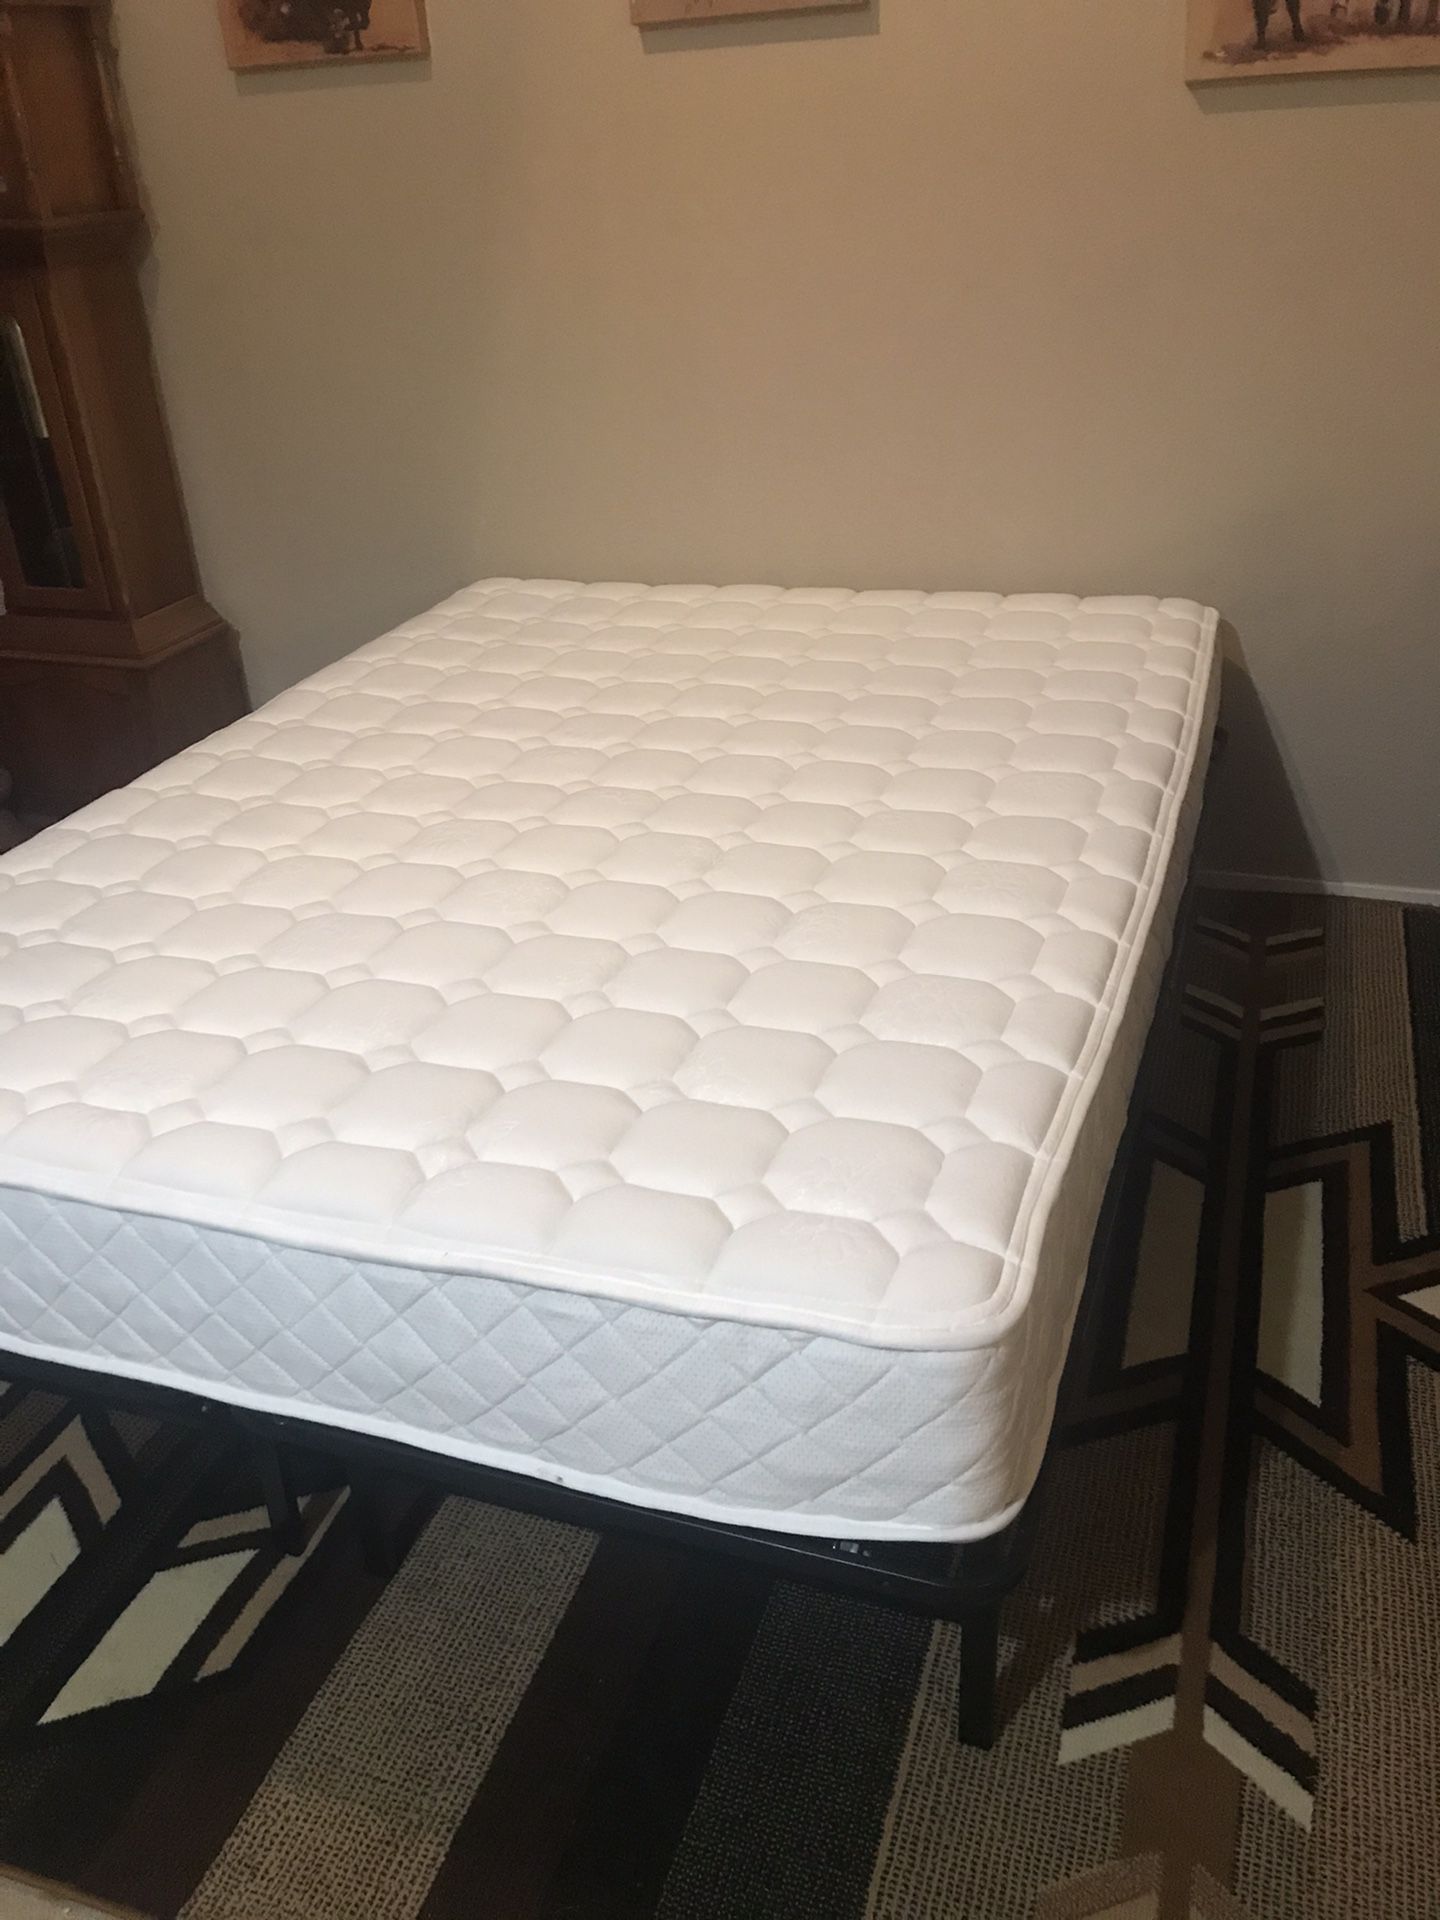 Super nice queen bed like new